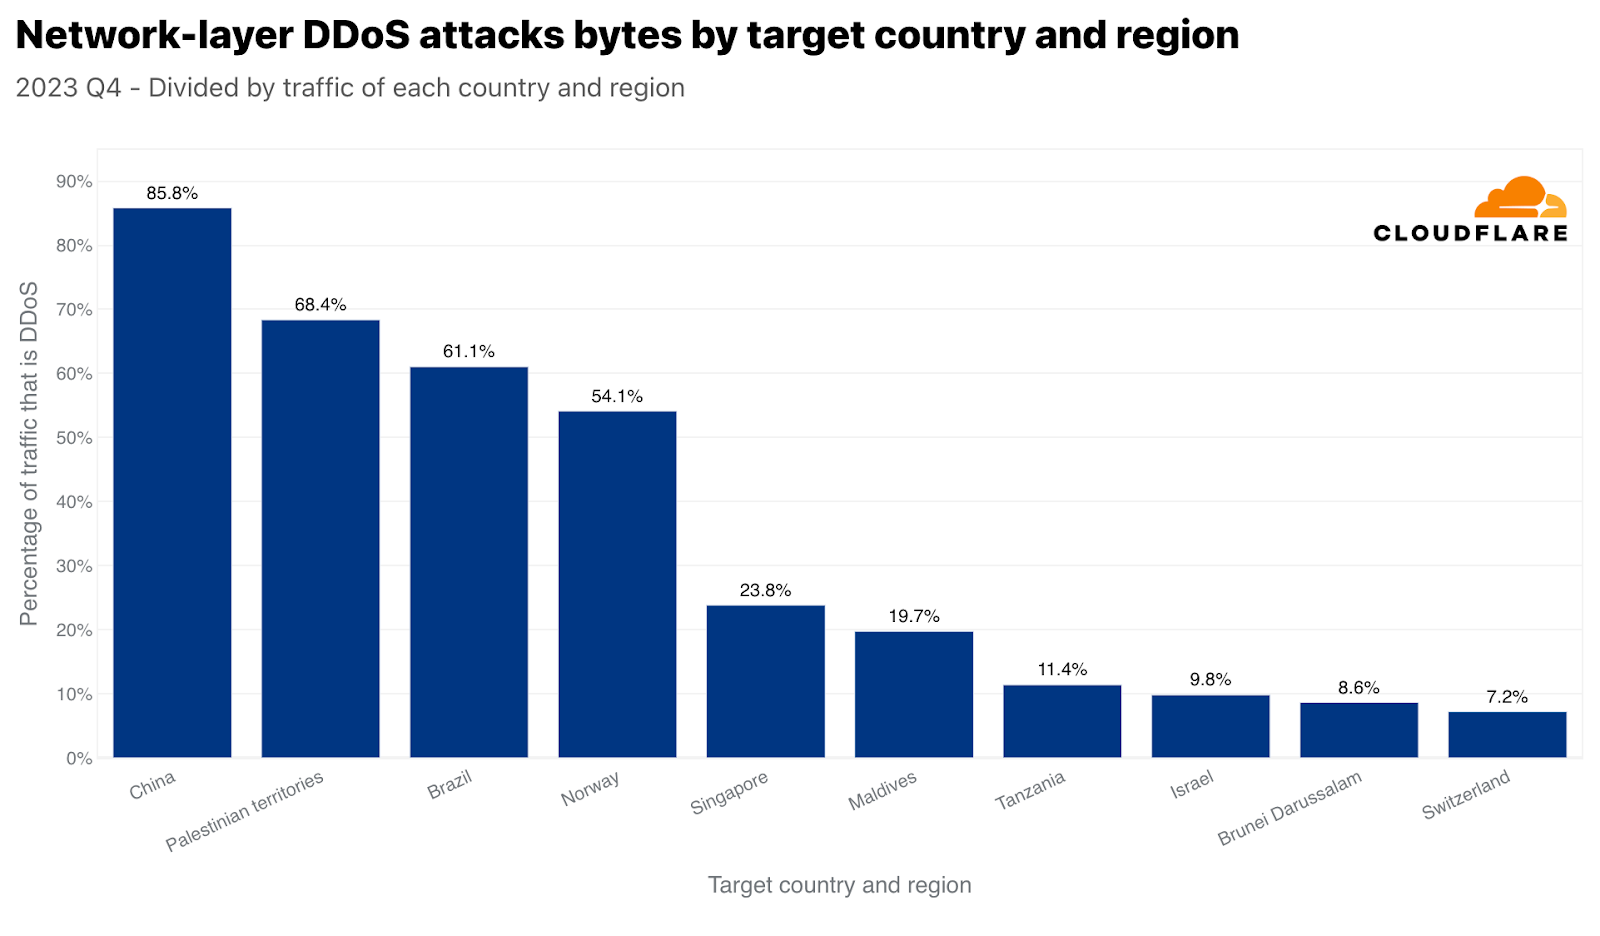 Top targeted countries by Network-layer DDoS attacks with respect to each country’s traffic